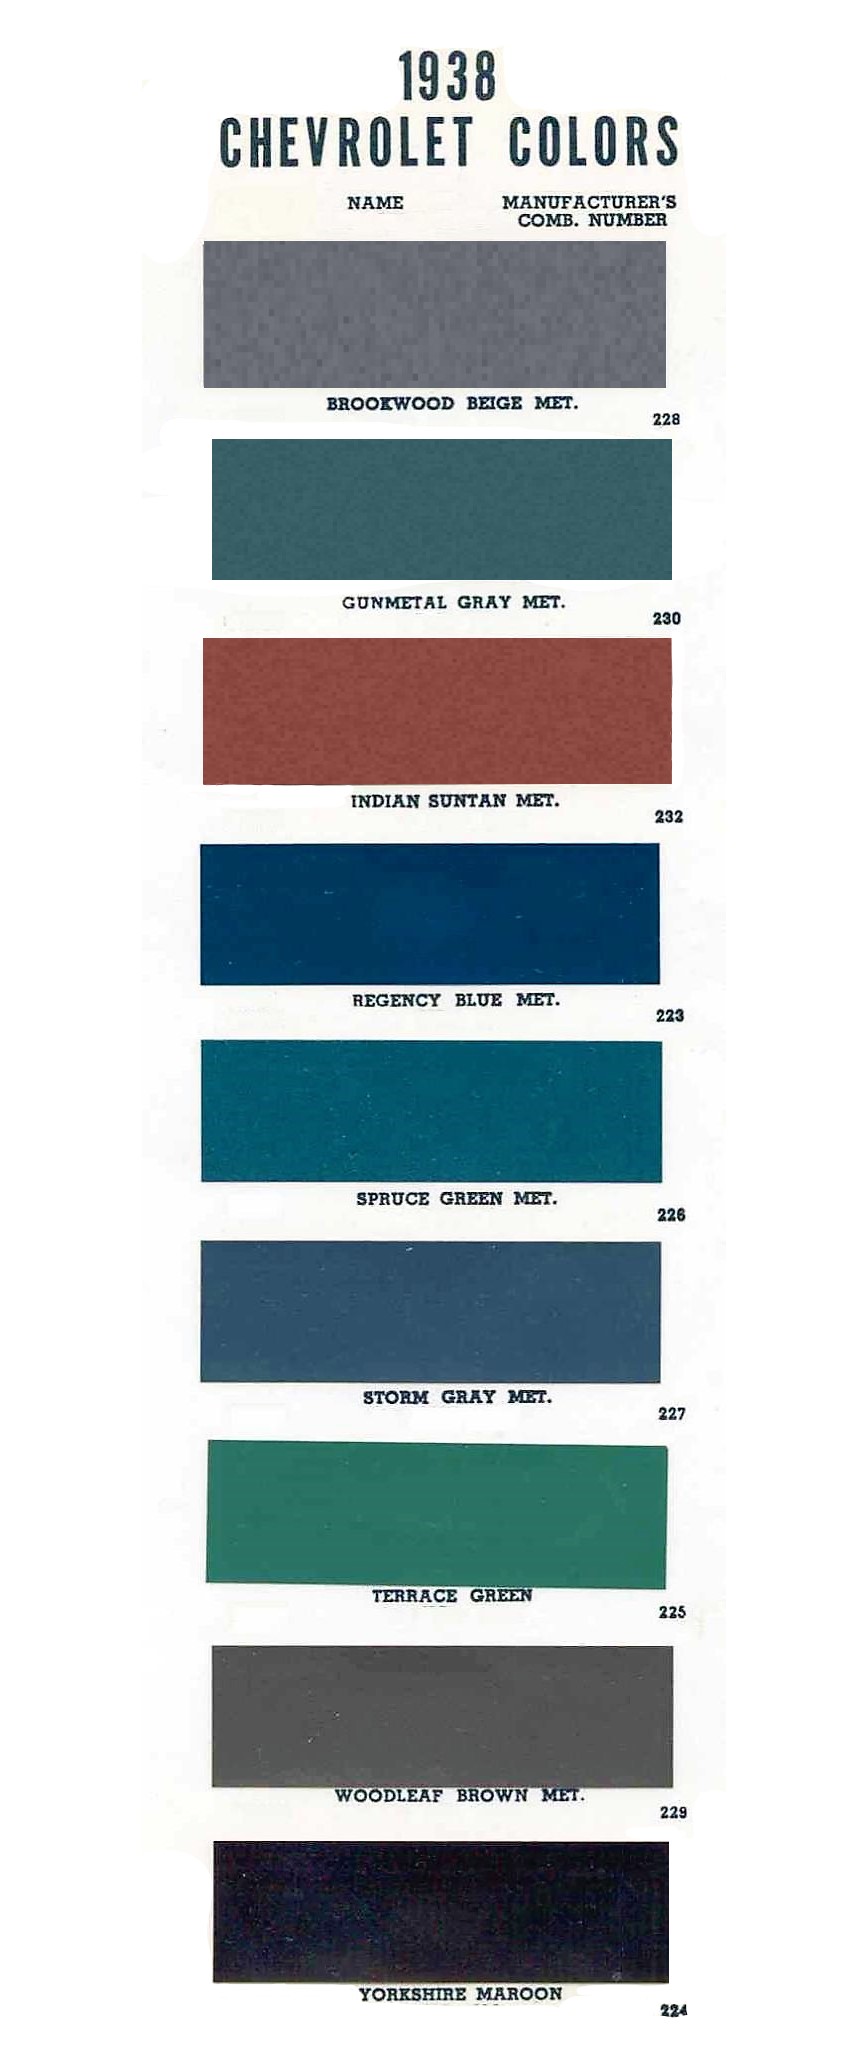 Paint Codes and Color Examples used on 1938 Chevrolet Vehicles